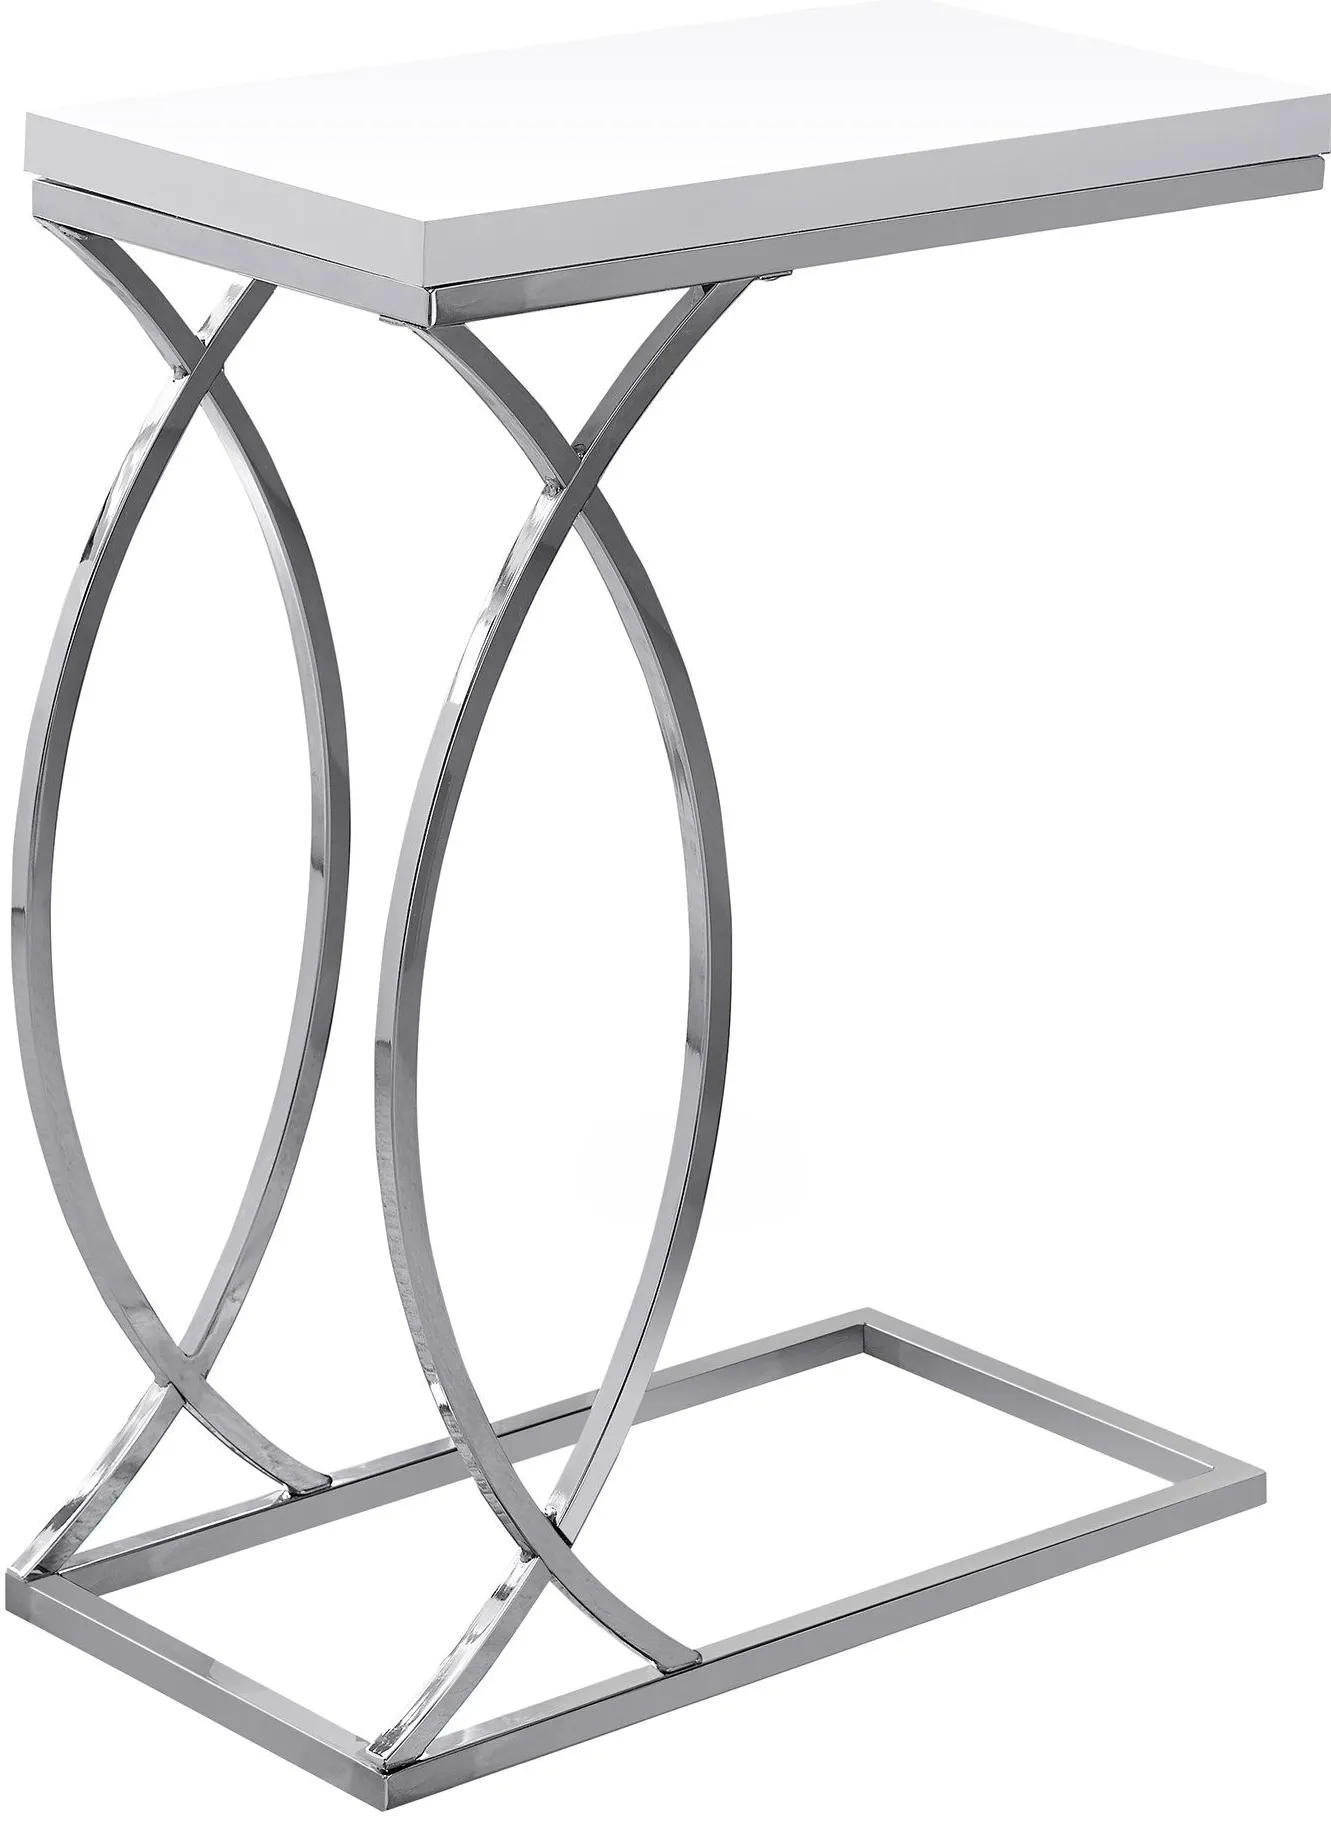 Accent Table, C-Shaped, End, Side, Snack, Living Room, Bedroom, Metal, Laminate, Glossy White, Chrome, Contemporary, Modern